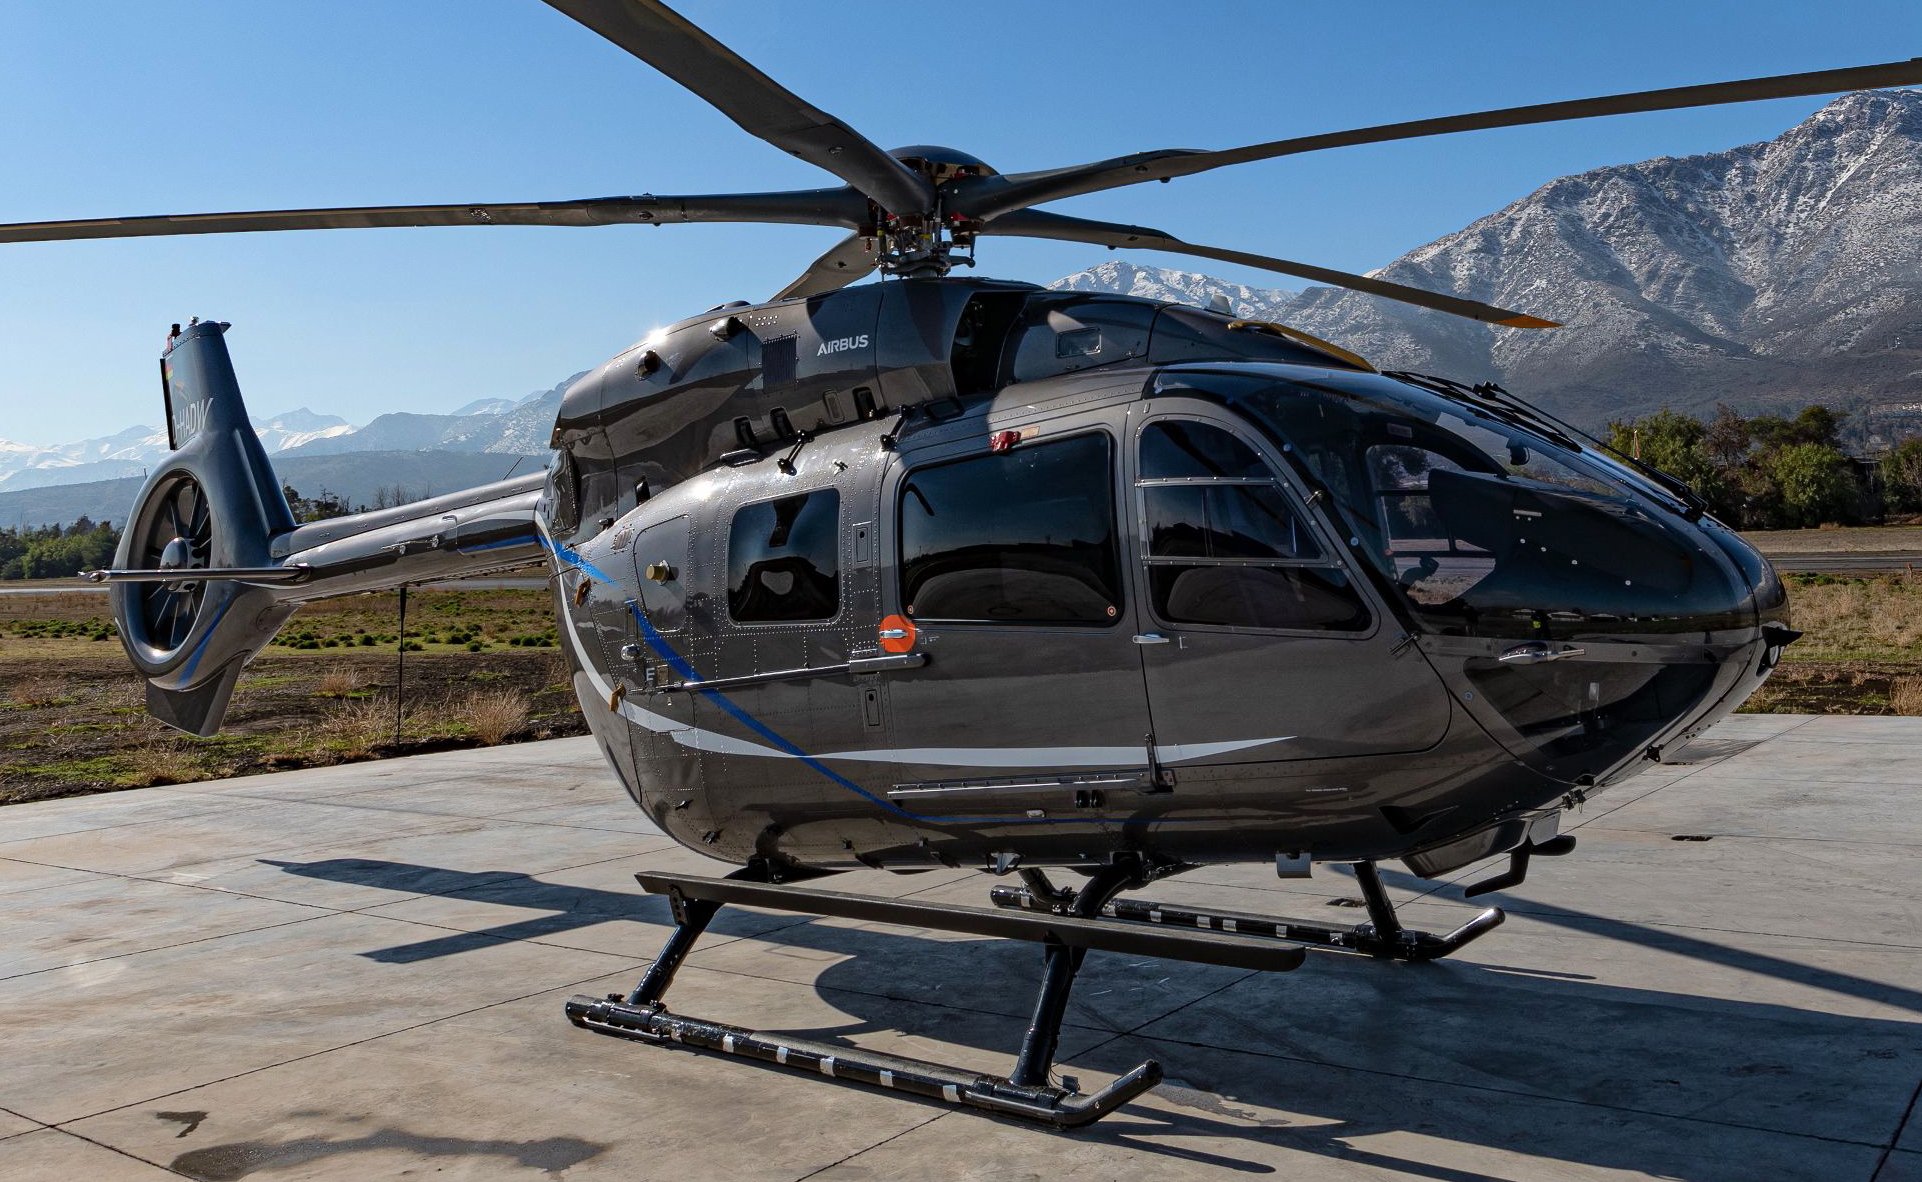 The prototype of Airbus' five-bladed H145 has arrived in Chile where it will start a high altitude flight campaign. EASA certification is expected in early 2020, with deliveries following later that year. Picture by Rodrigo Ocharán. Click to enlarge.